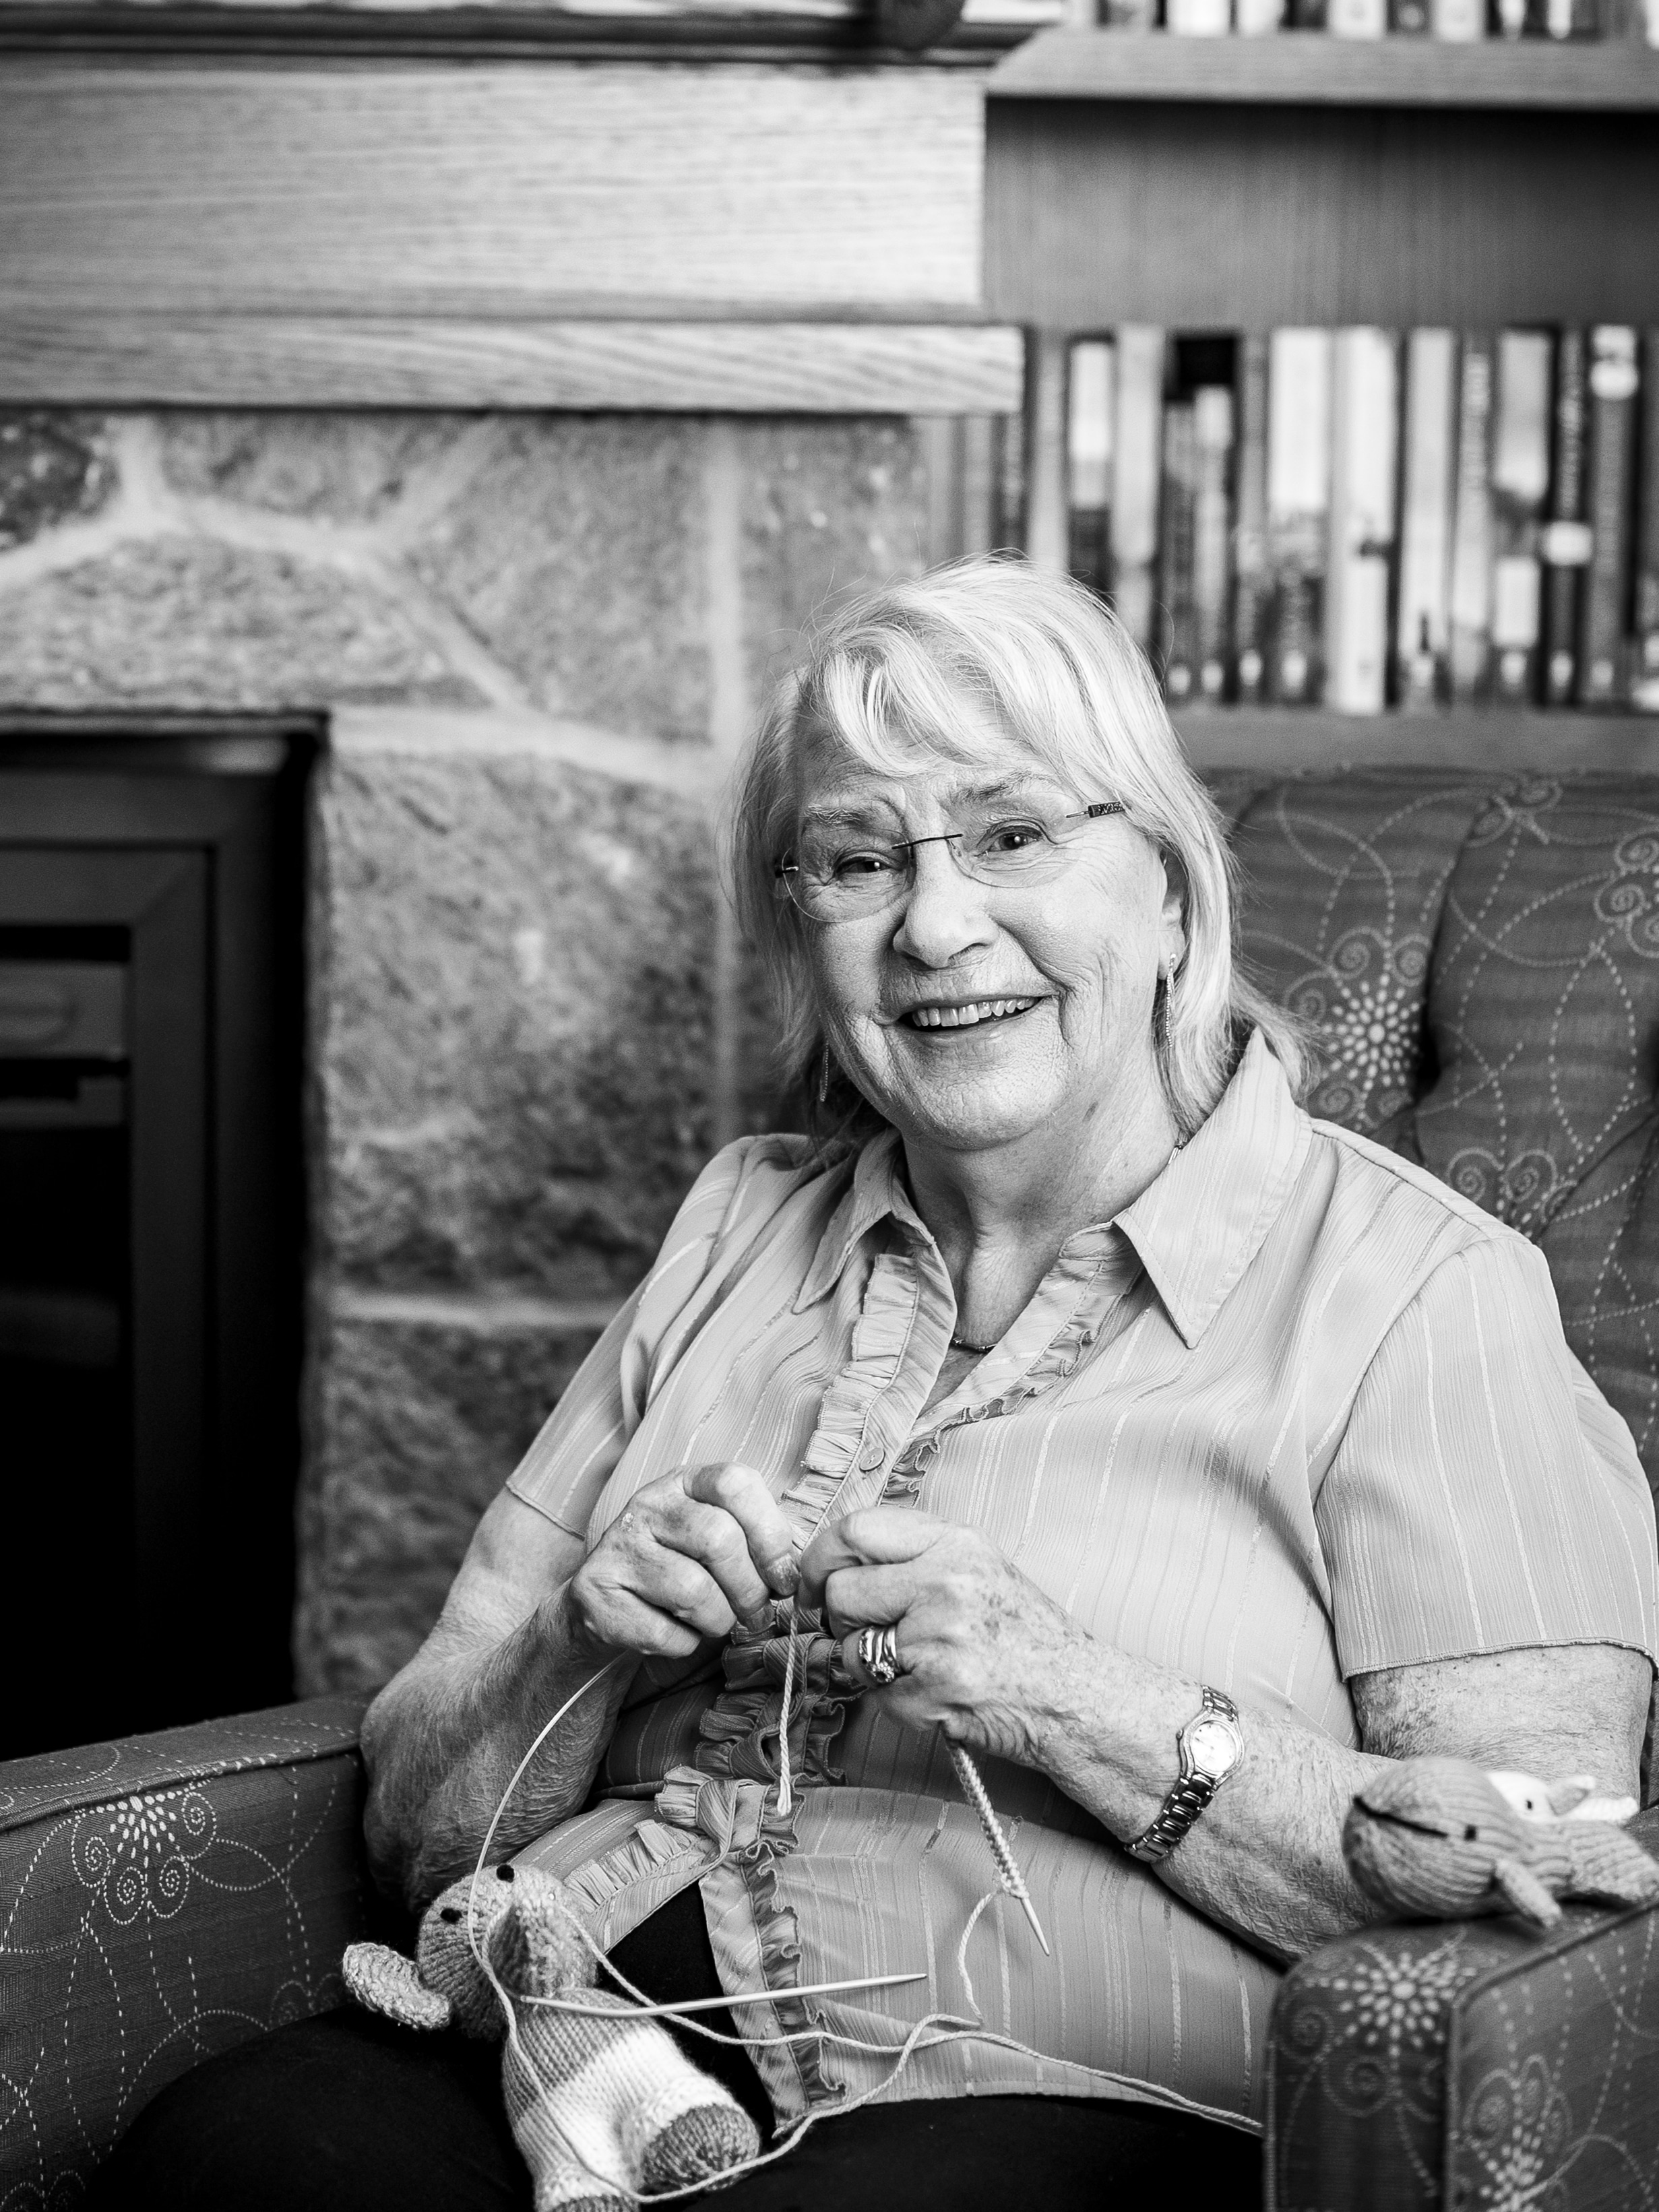 Jill Barrett knitting in the library at the Village in a black and white portrait